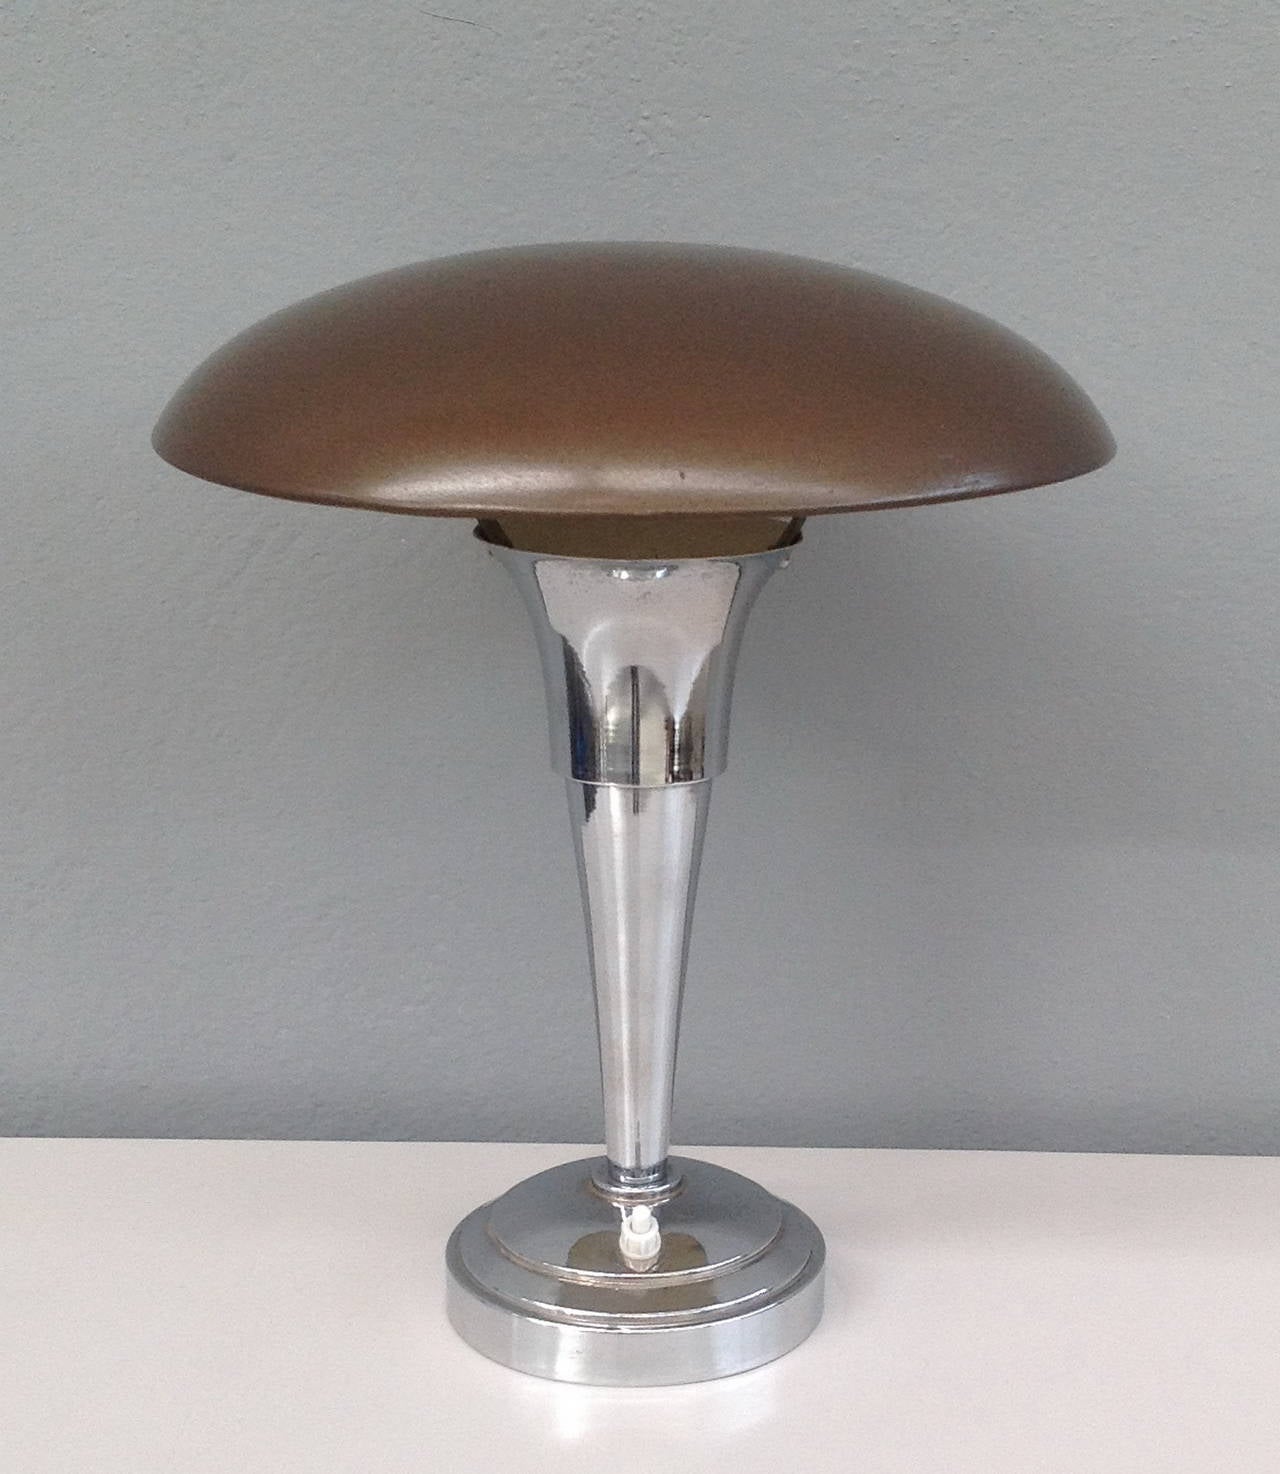 Chrome table lamp with lacquered metal top.